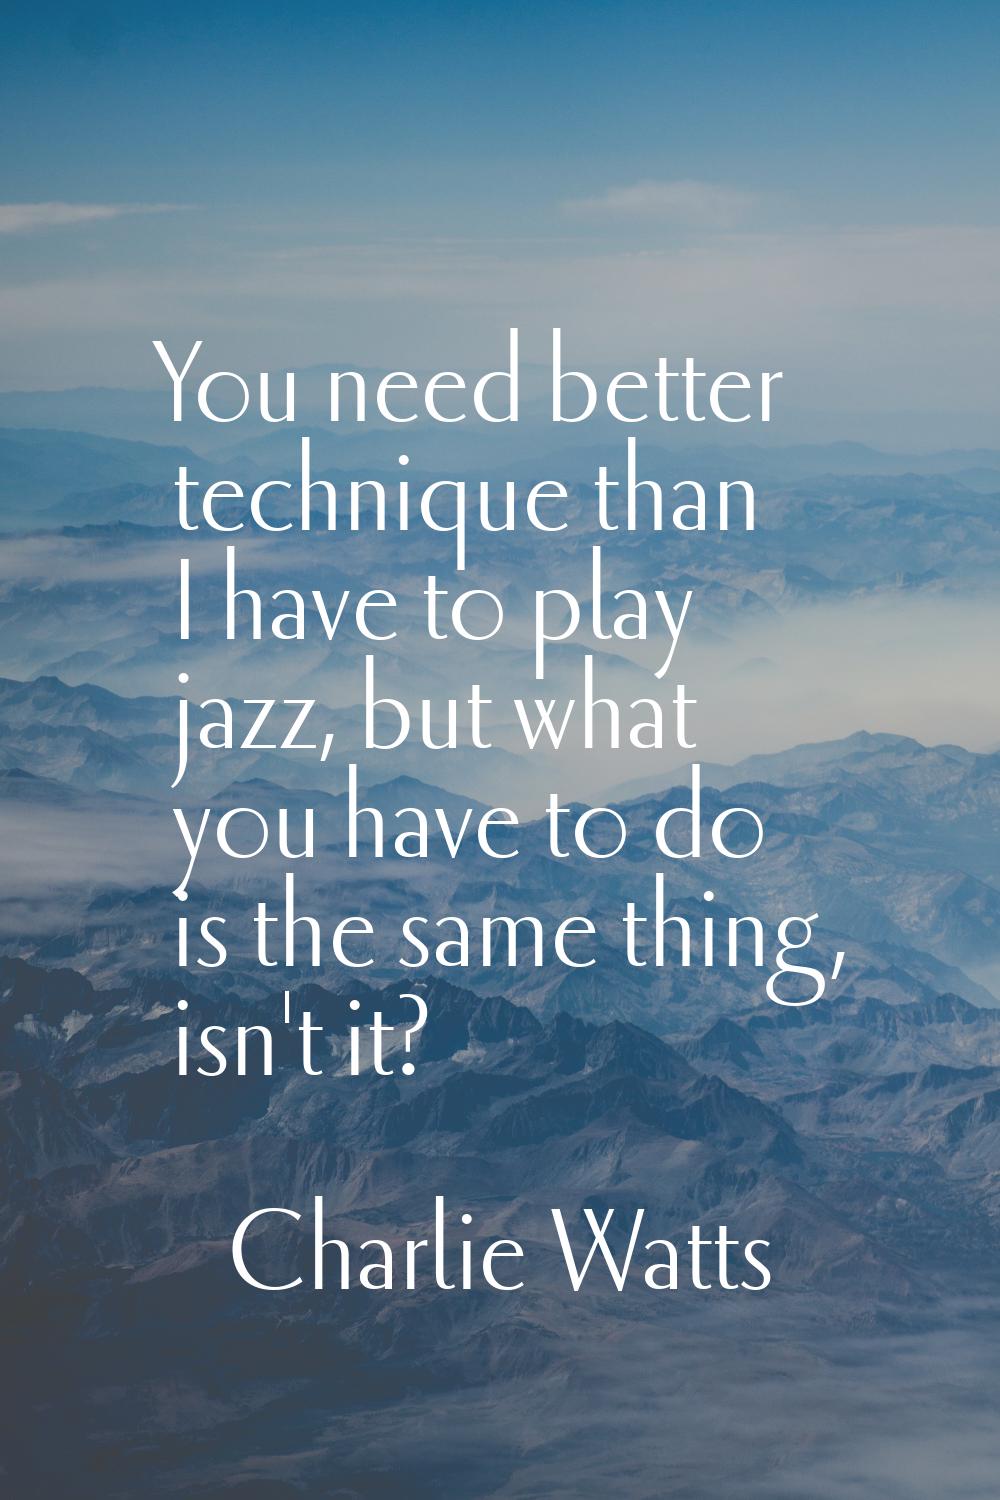 You need better technique than I have to play jazz, but what you have to do is the same thing, isn'